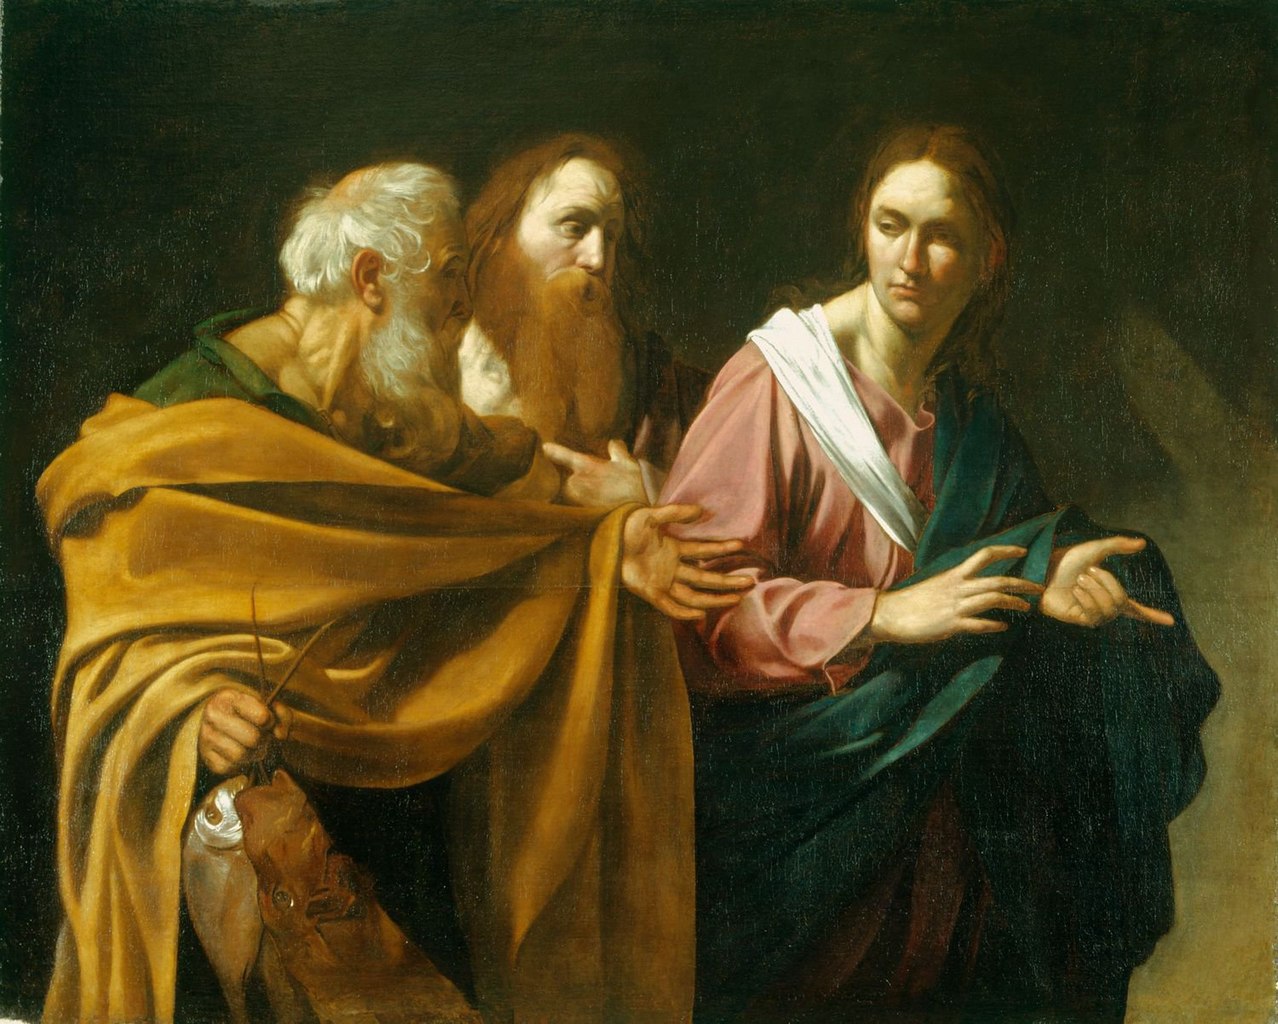 1278px-The_Calling_of_Saints_Peter_and_Andrew_-_Caravaggio_1571-1610.jpg